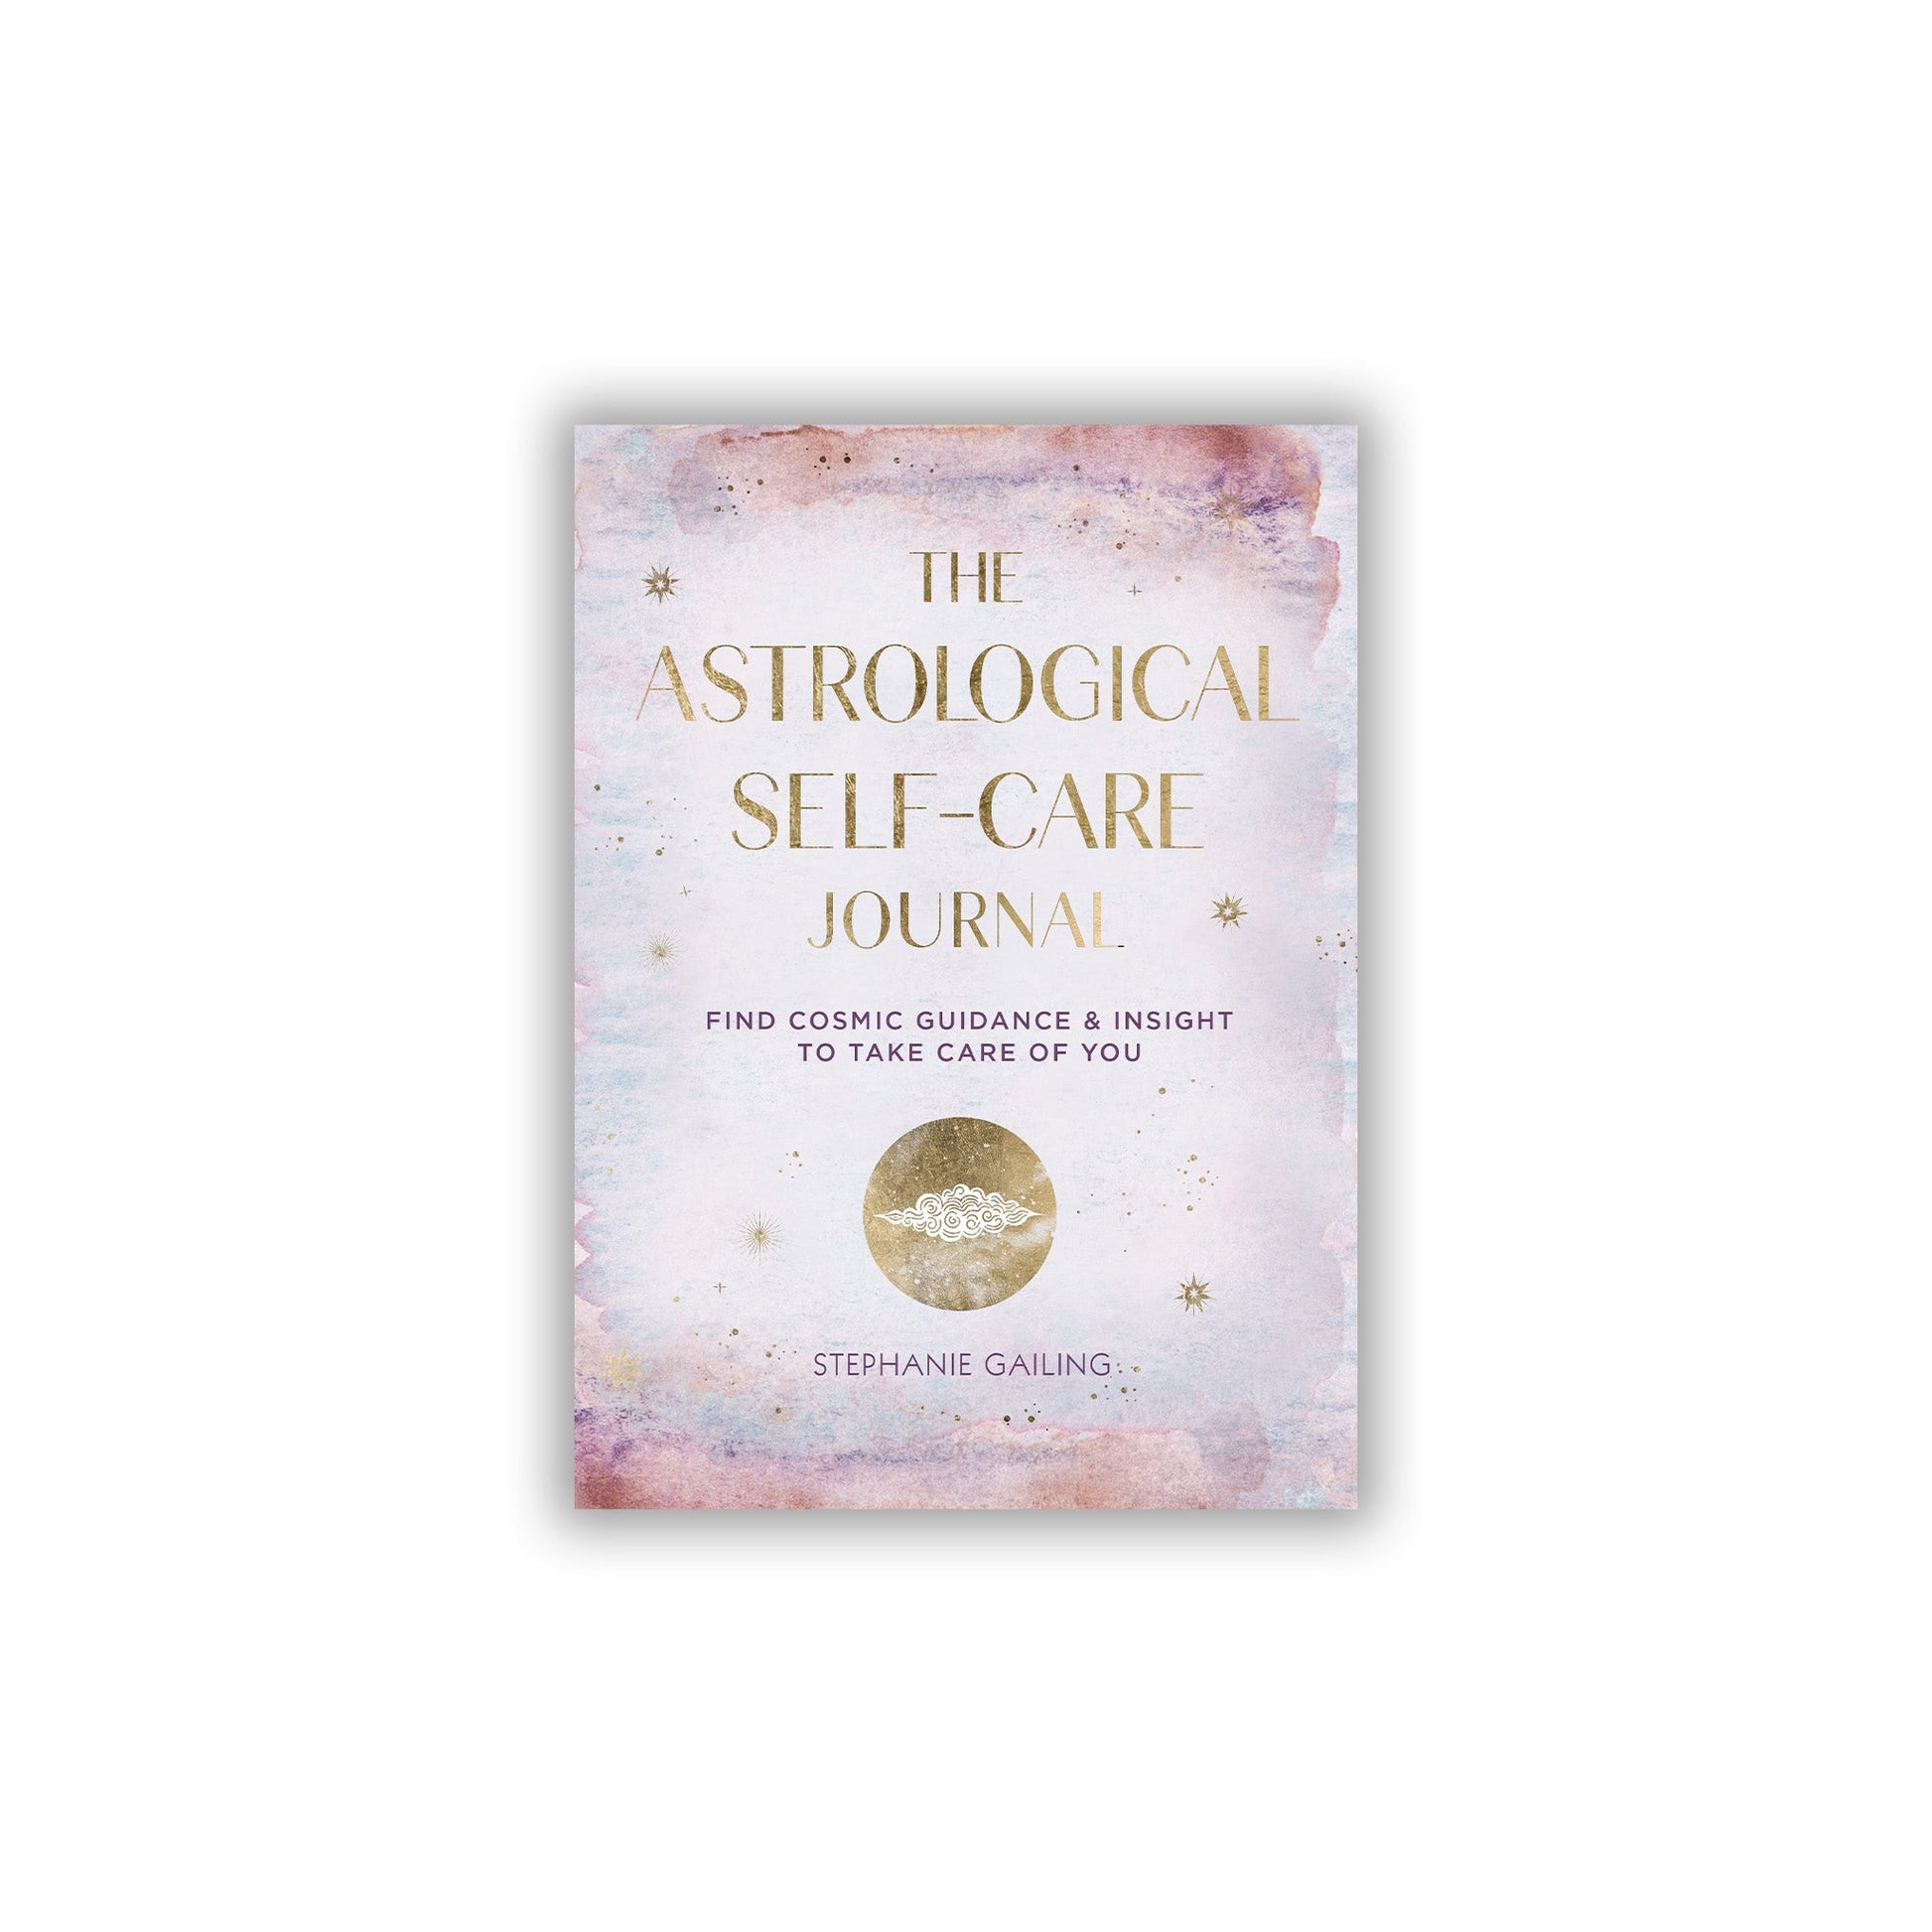 The Astrological Self-Care Journal: Find Cosmic Guidance & Insight to Take Care of You - Muse + Moonstone